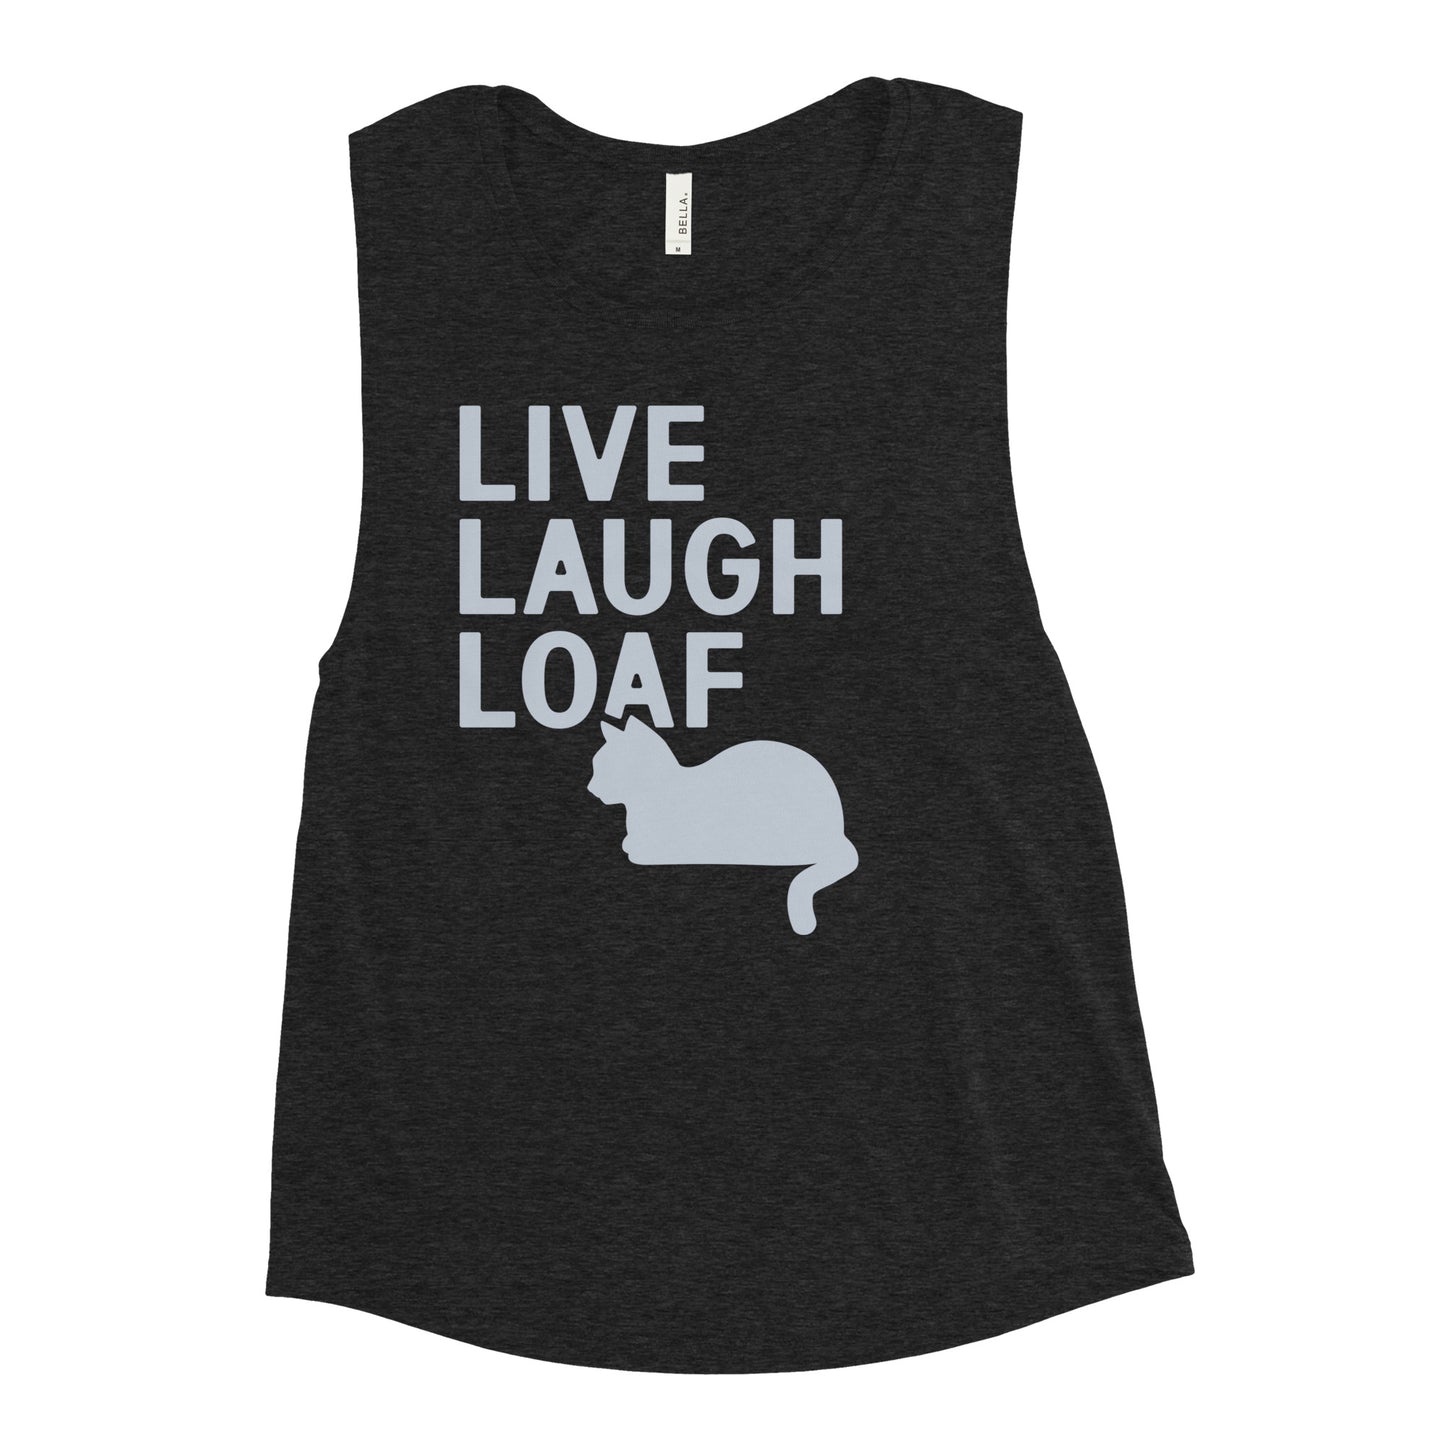 Live Laugh Loaf Women's Muscle Tank